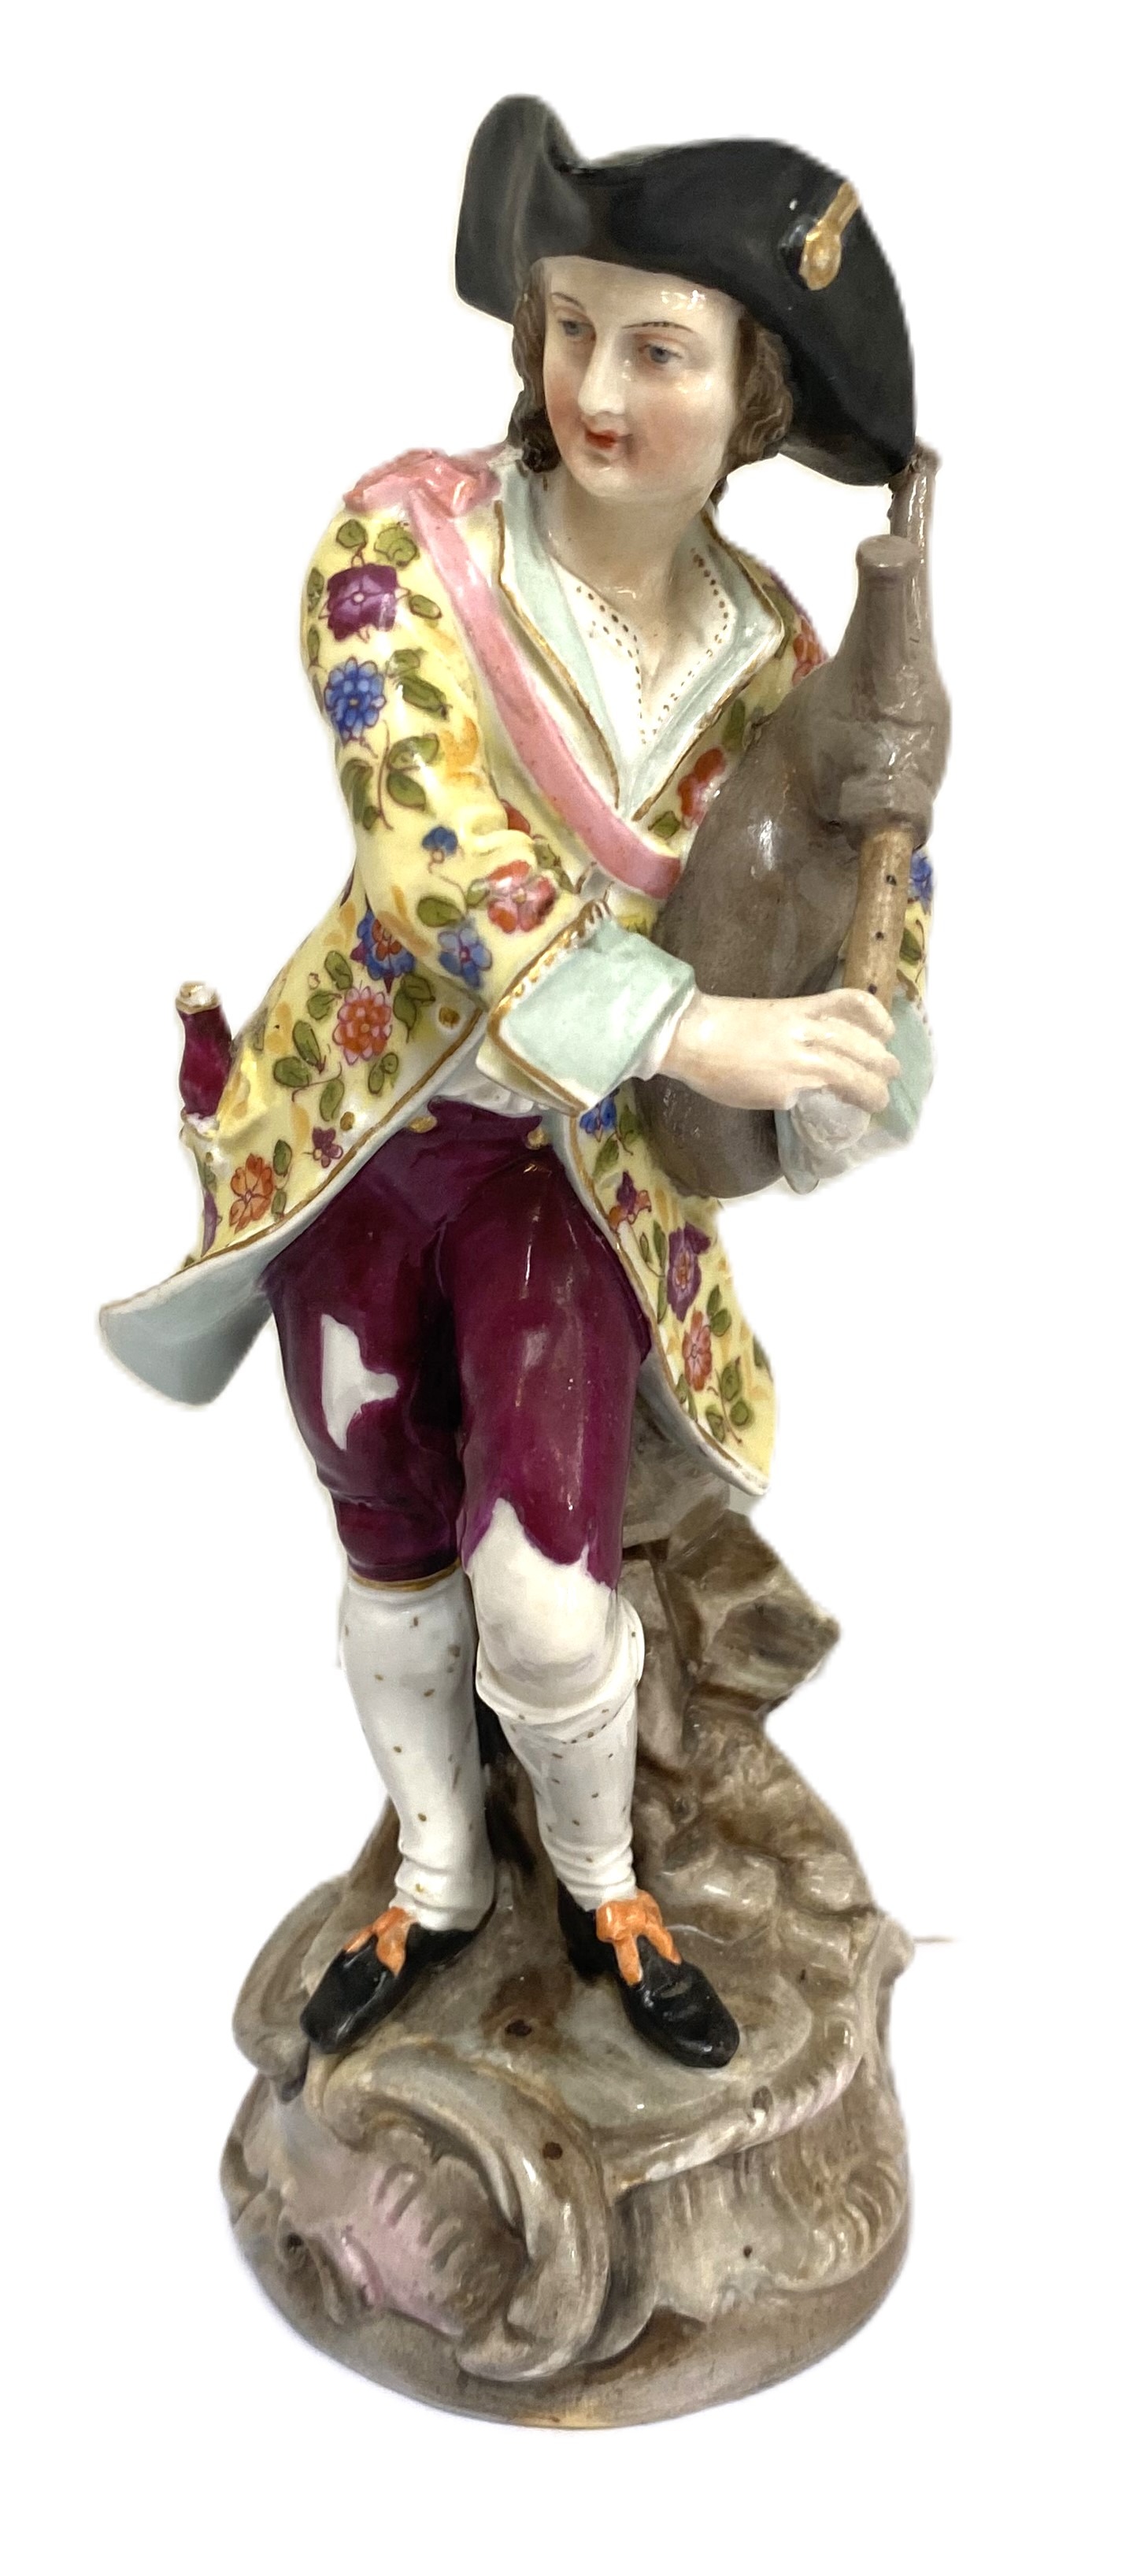 A pair of Dresden porcelain figures of a Lady and Gallant, dressed for hunting, she with a musket - Image 3 of 6